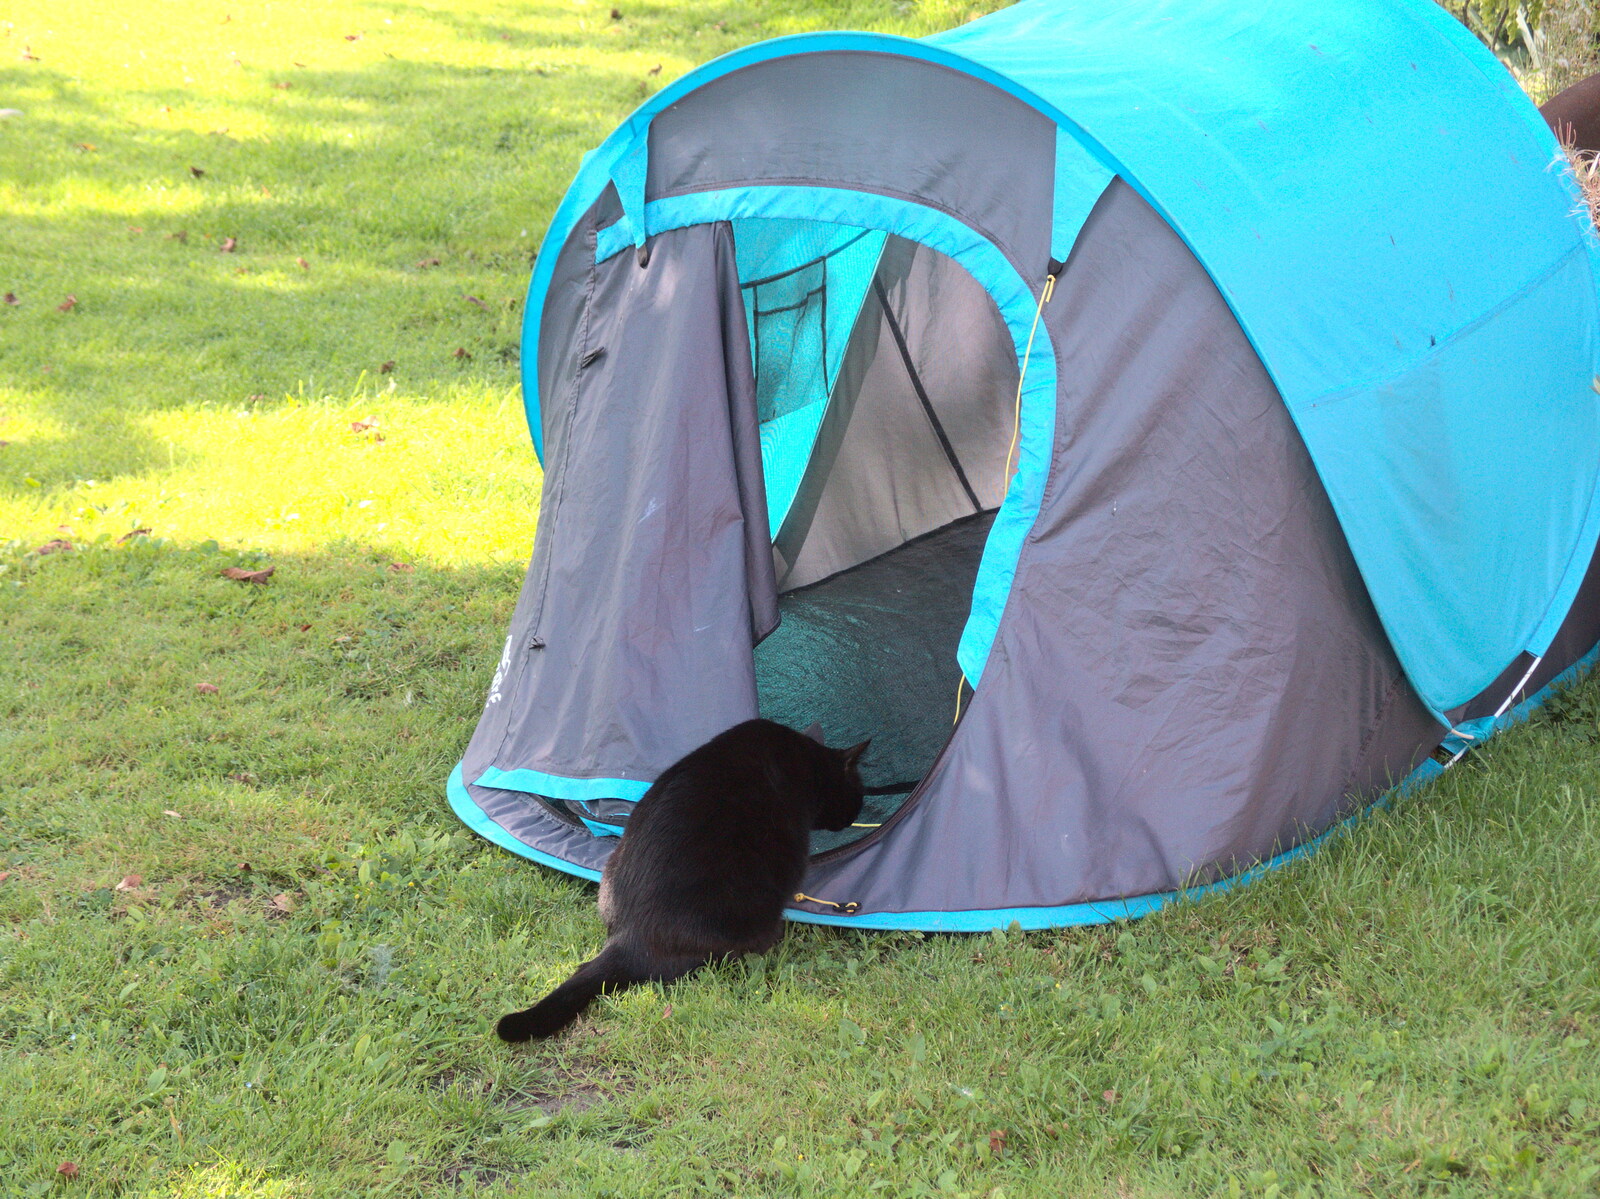 Millie Cat has a sniff inside the tent from The BSCC at Yaxley and the Hoxne Beer Festival, Suffolk - 31st August 2017